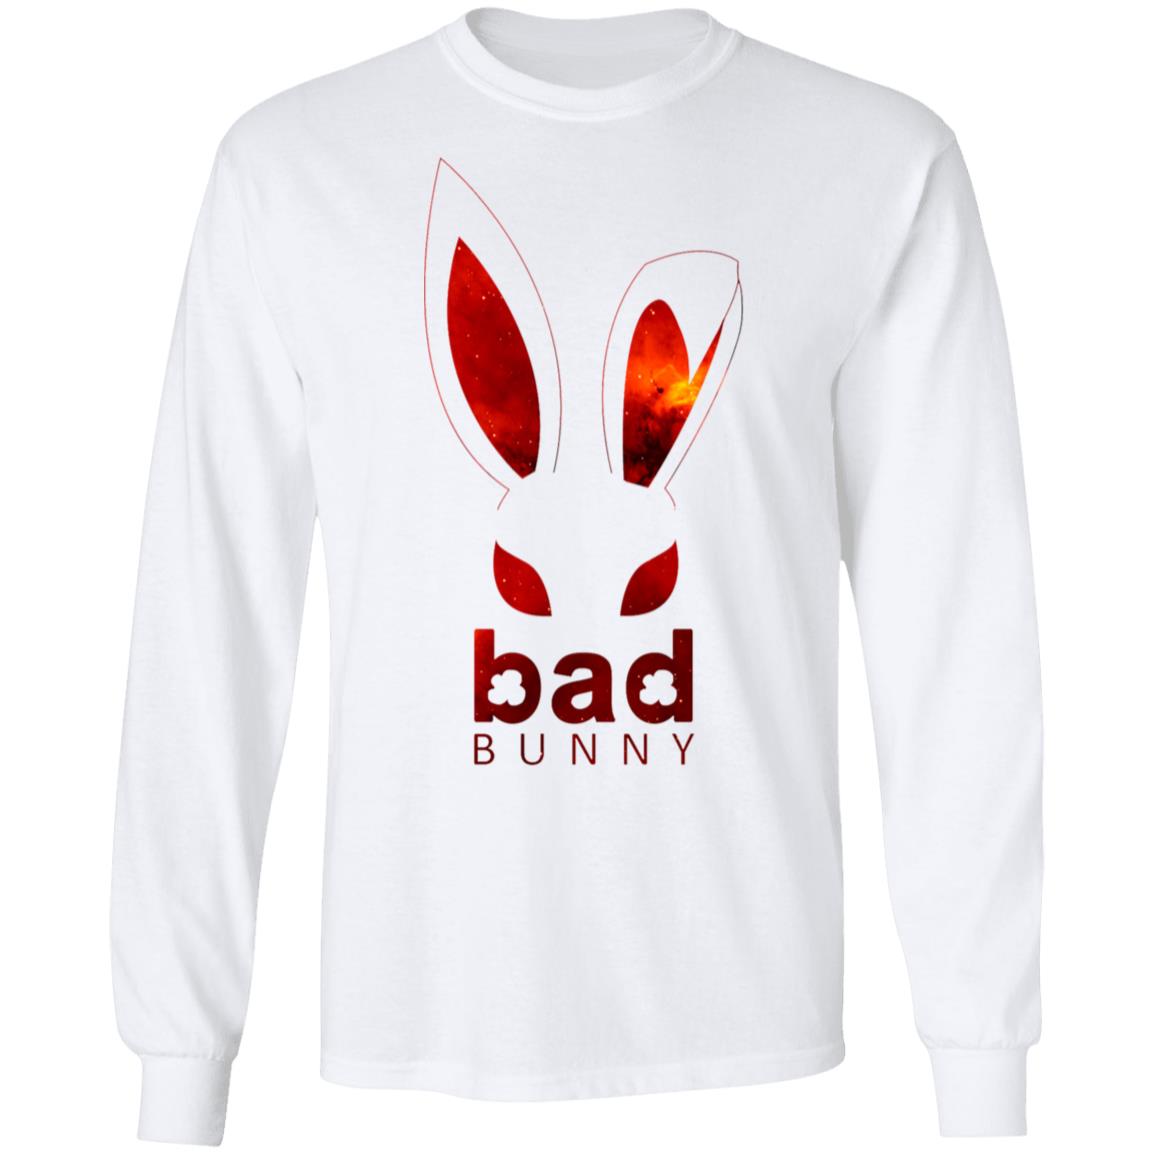 Bad Bunny Shirt: Show your musical passion and artistic pursuits插图